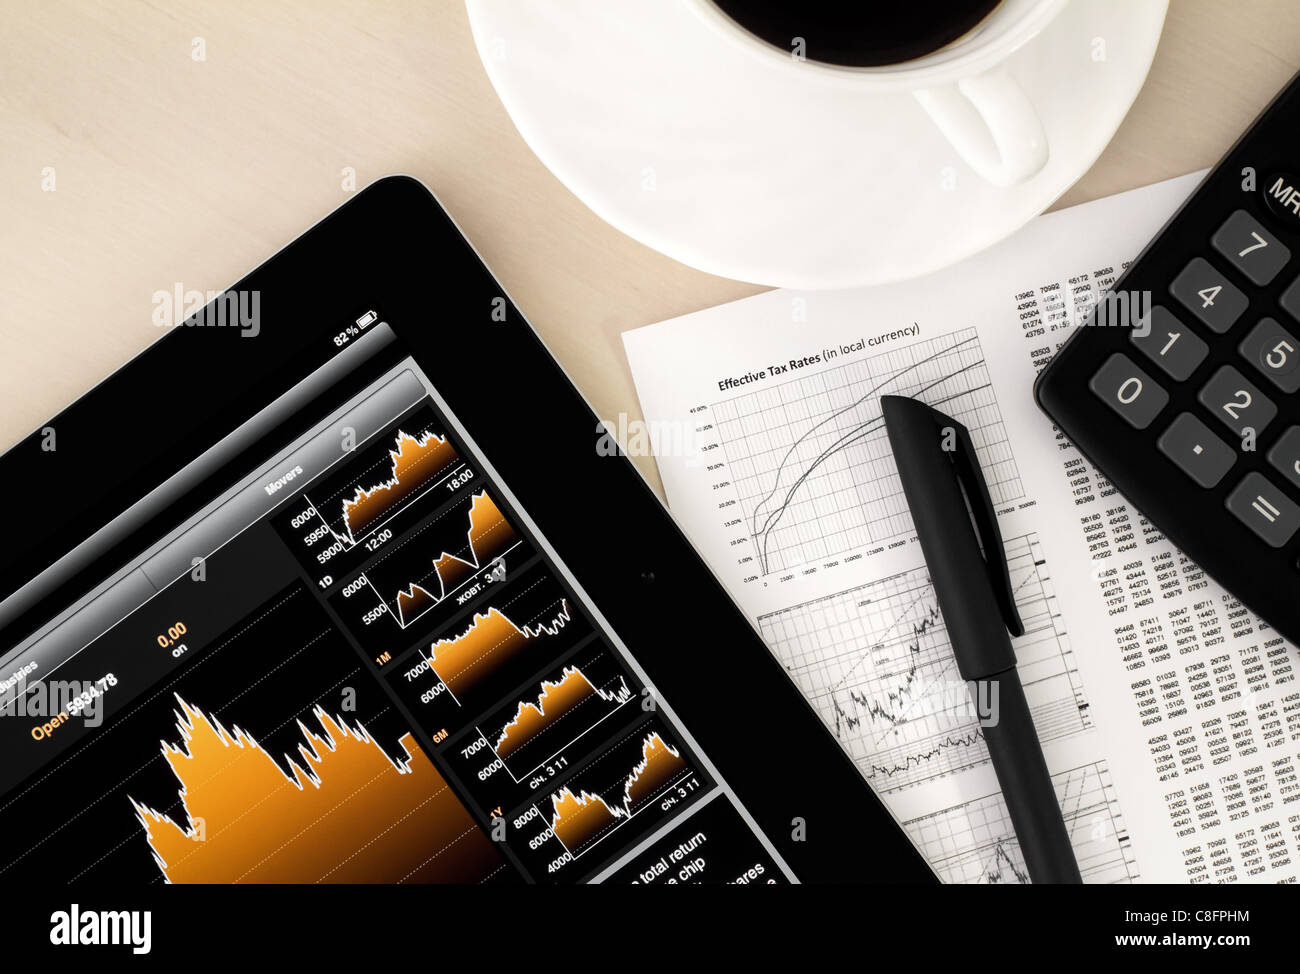 Desktop in stock exchange office with a tablet pc showing stock market chart. Stock Photo